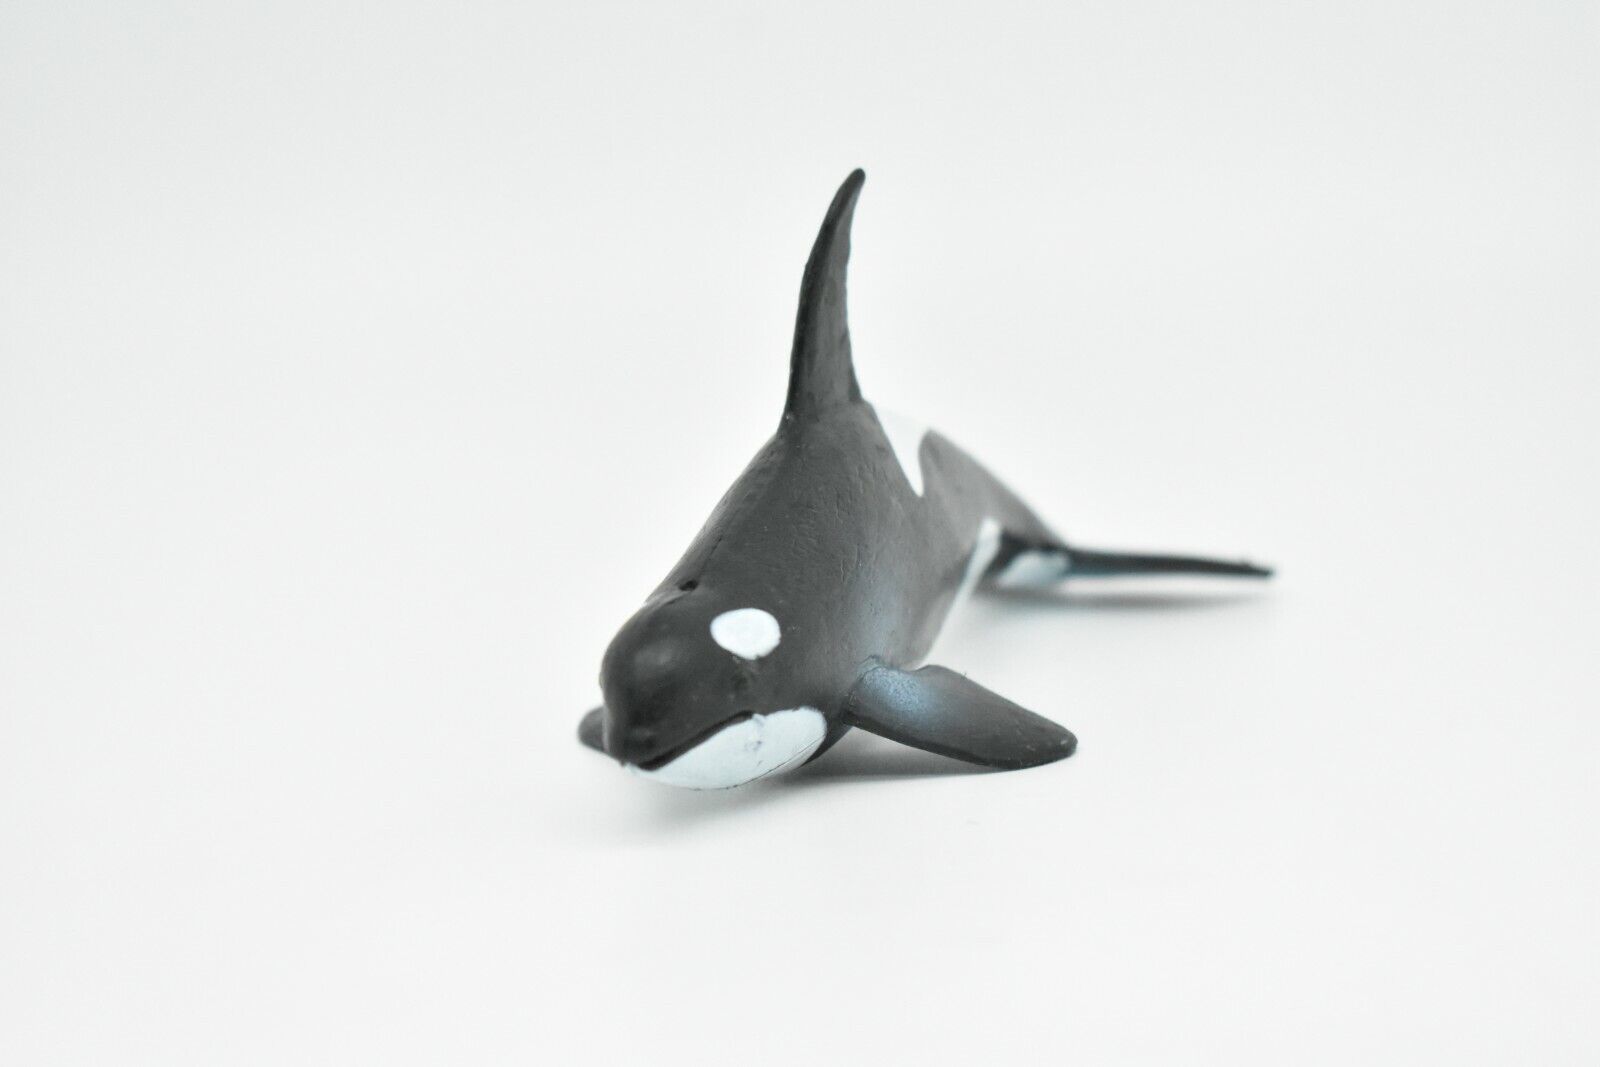 Orca Killer Whale Toy Model Figure Quality Rubber Replica Hand